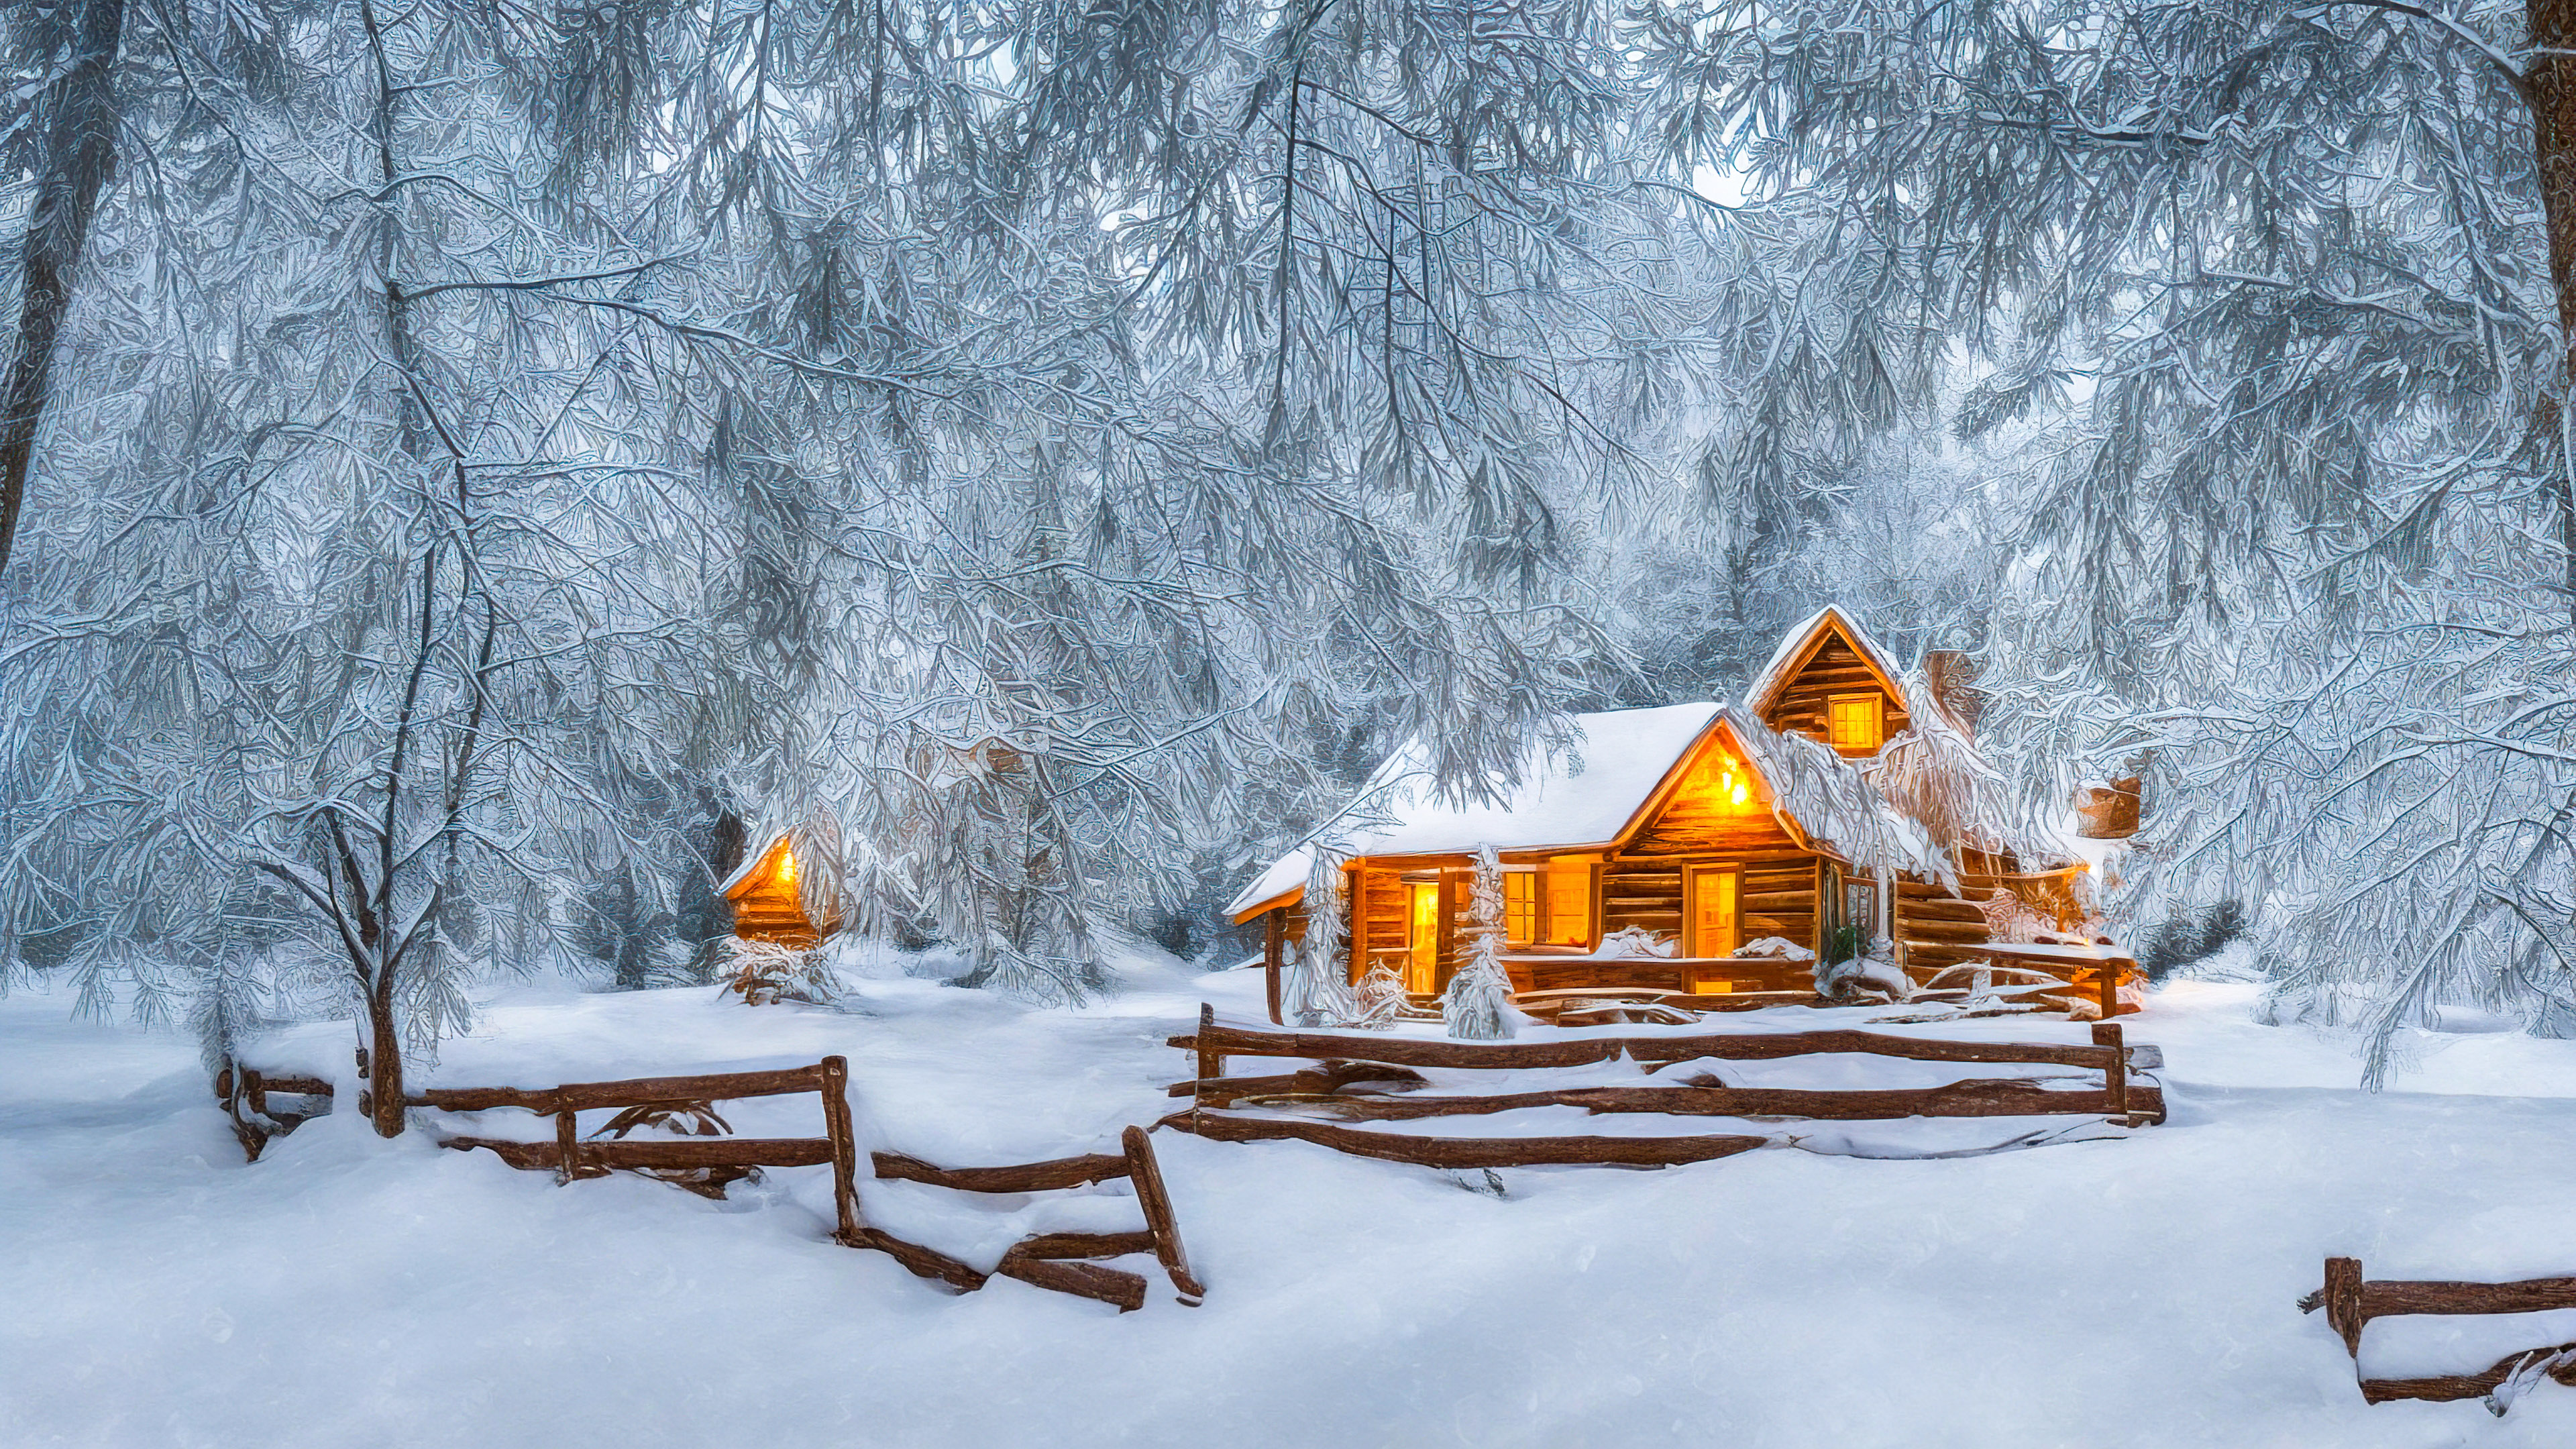 Experience the tranquility of our HD wallpapers in 1920x1080 resolution of nature, featuring a serene winter wonderland with snow-covered trees and a cozy cabin adorned with holiday lights, and let your screen become a portal to a peaceful snowy retreat.